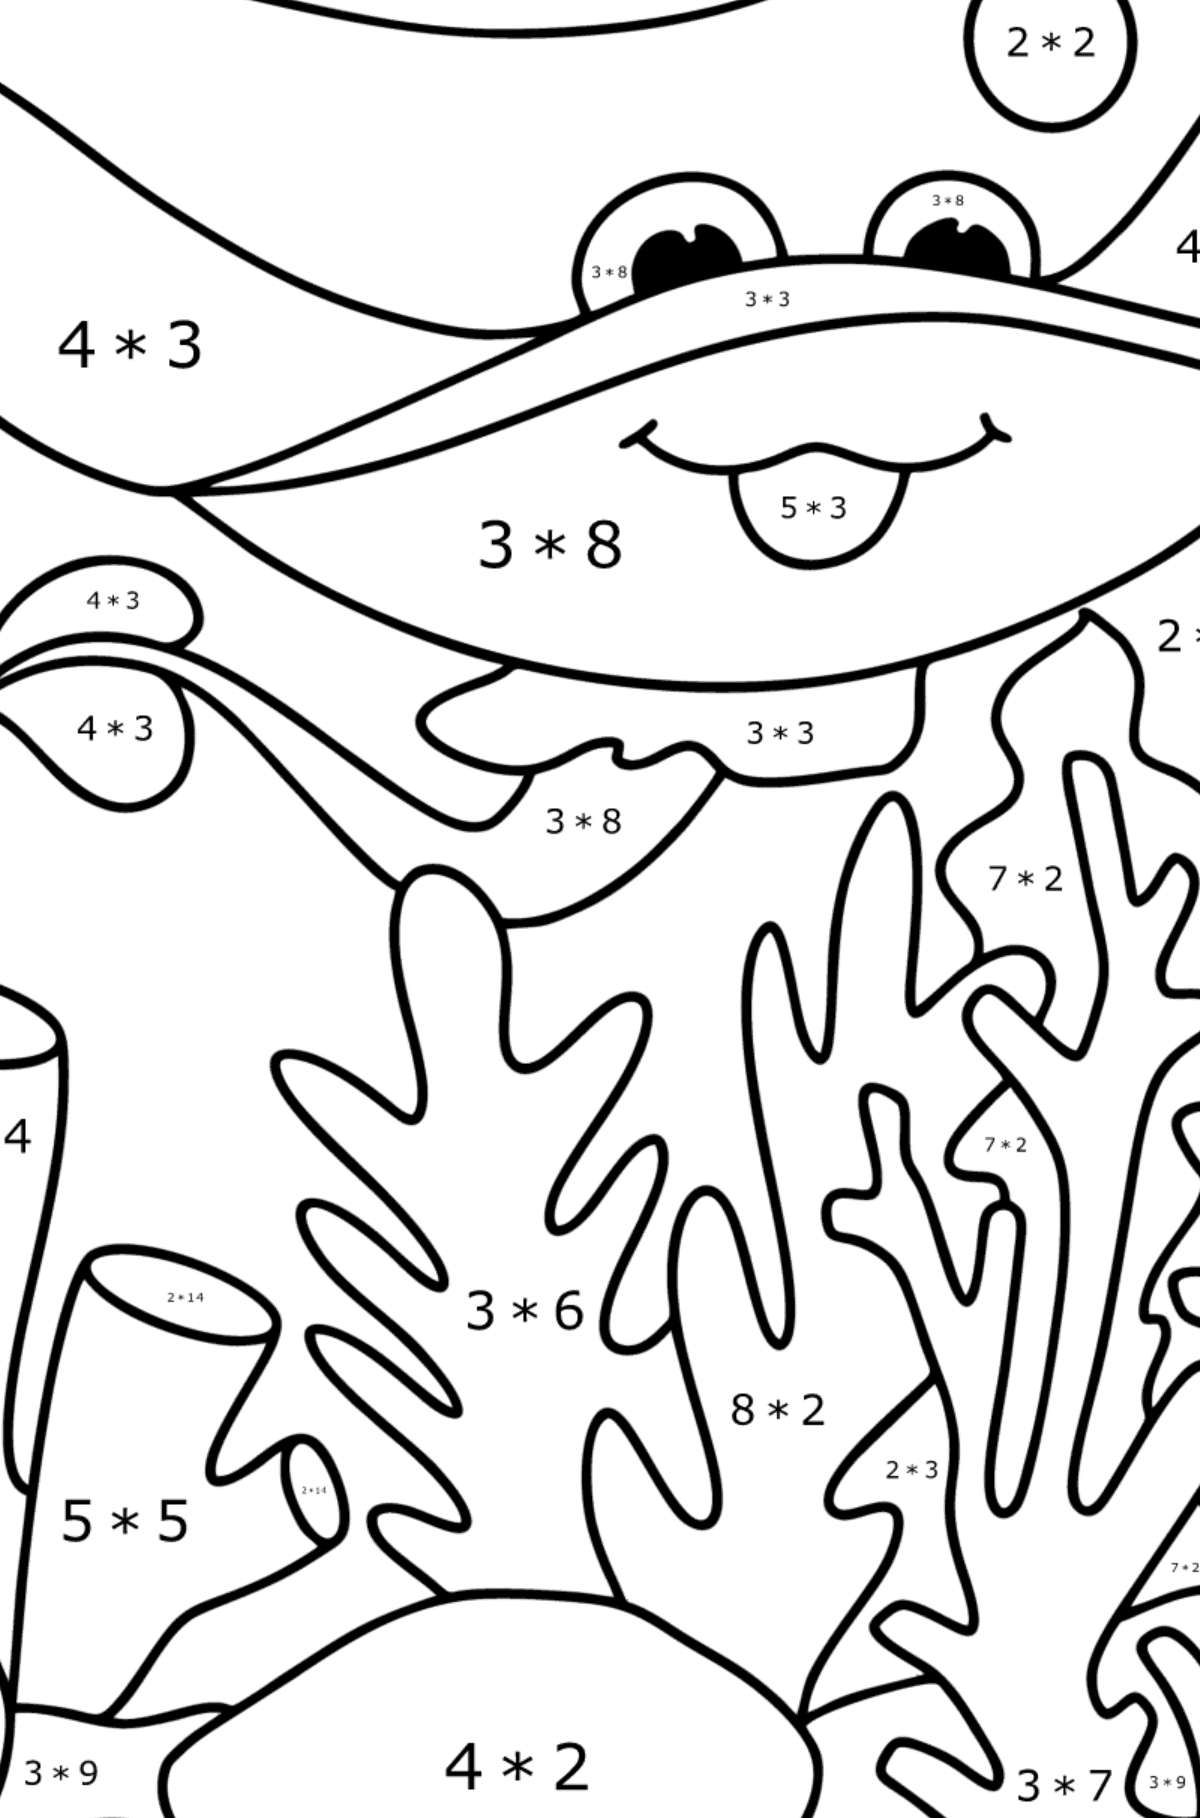 Stingray coloring page - Math Coloring - Multiplication for Kids